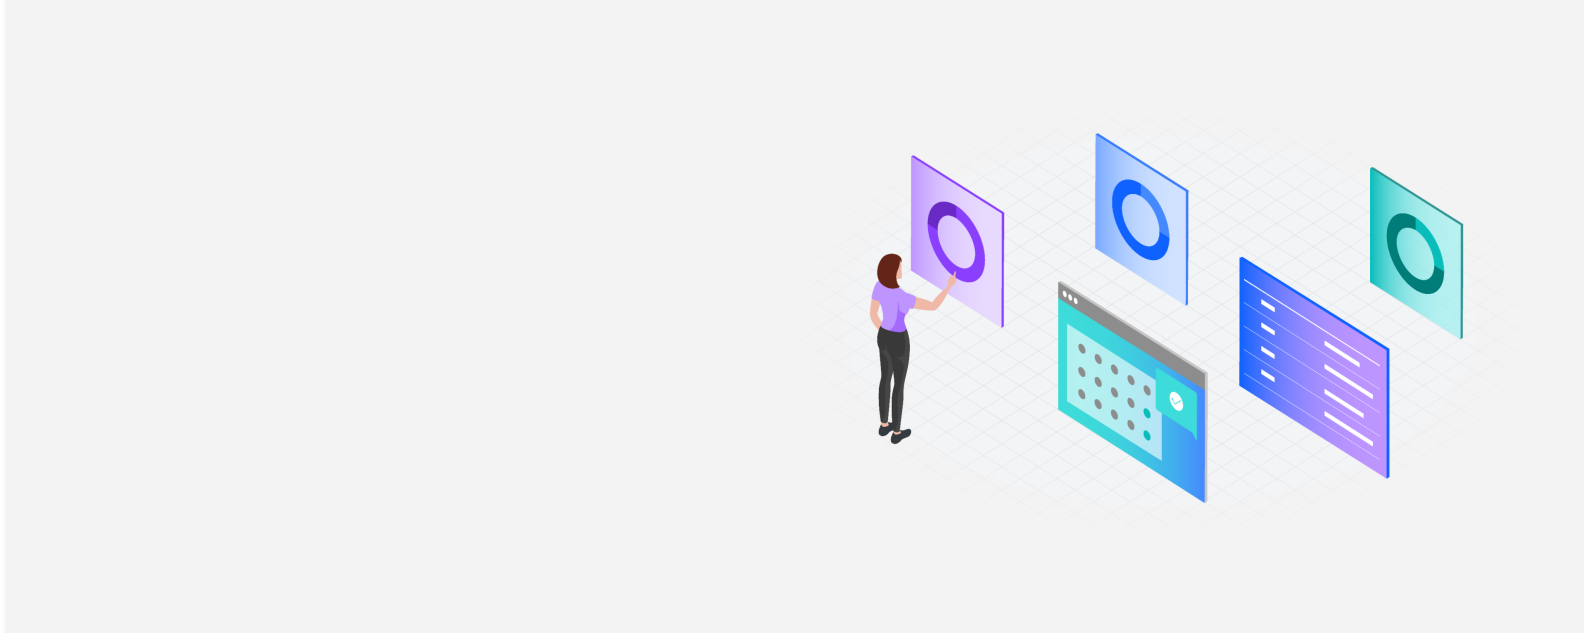 Isometric illustration depicting person touching a screen surrounded by other various data monitors